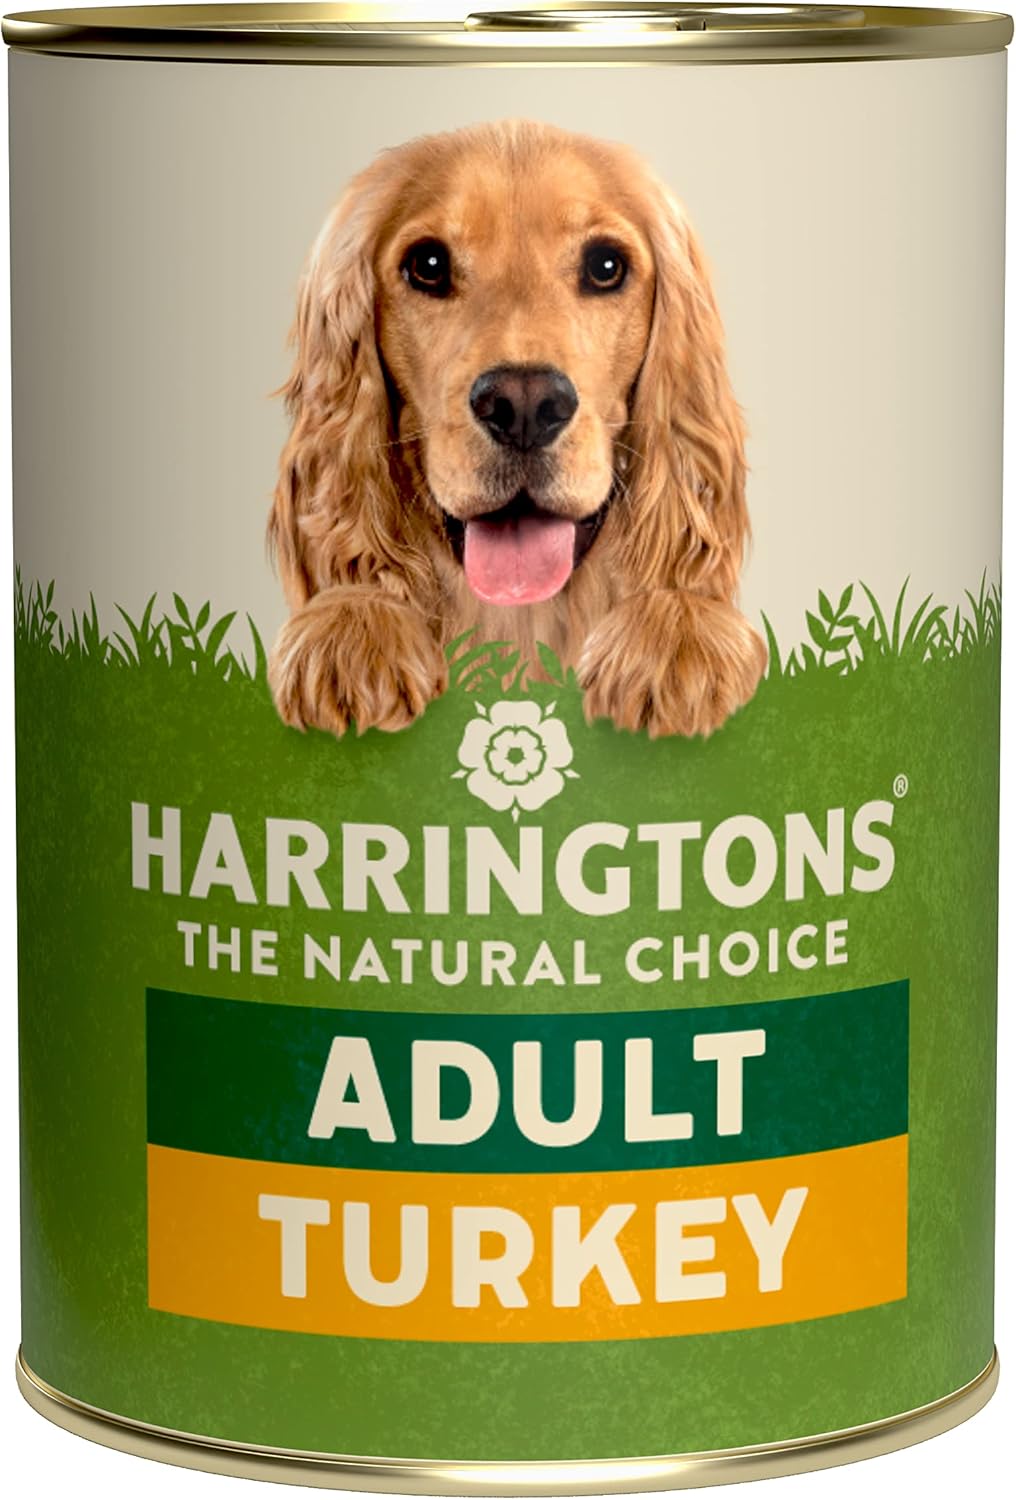 Harringtons Complete Wet Can Grain Free Hypoallergenic Adult Dog Food Turkey & Veg 6x400g - Made with All Natural Ingredients?HARRCANT-400